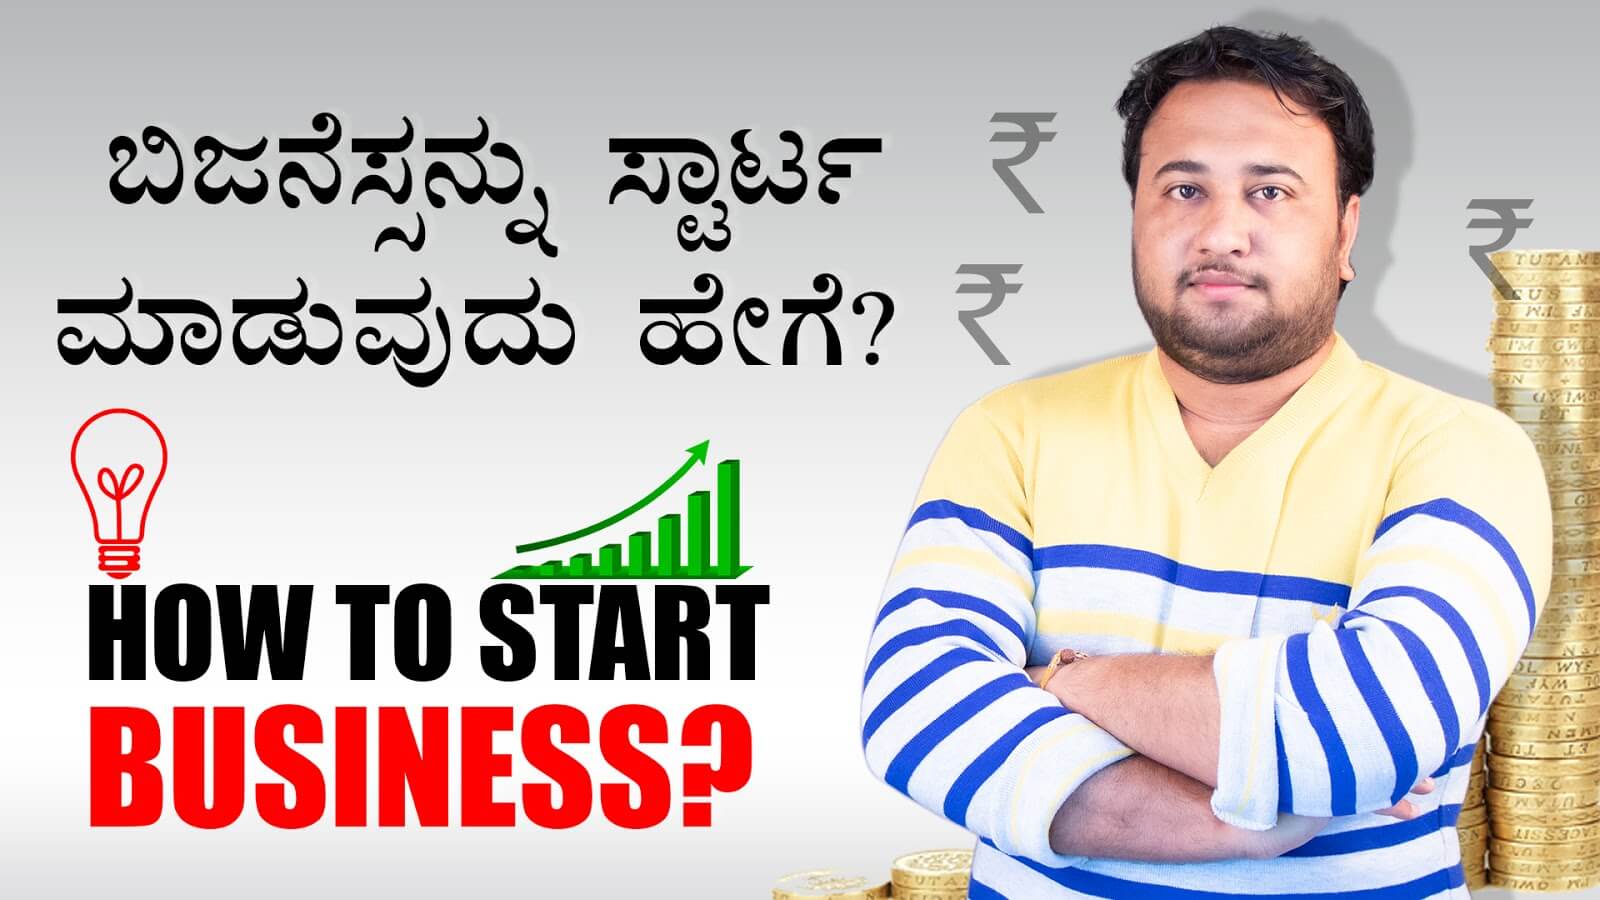 You are currently viewing ಬಿಜನೆಸ್ಸನ್ನು ಸ್ಟಾರ್ಟ ಮಾಡುವುದು ಹೇಗೆ? – How to Start Business? How to start Start-up? in Kannada